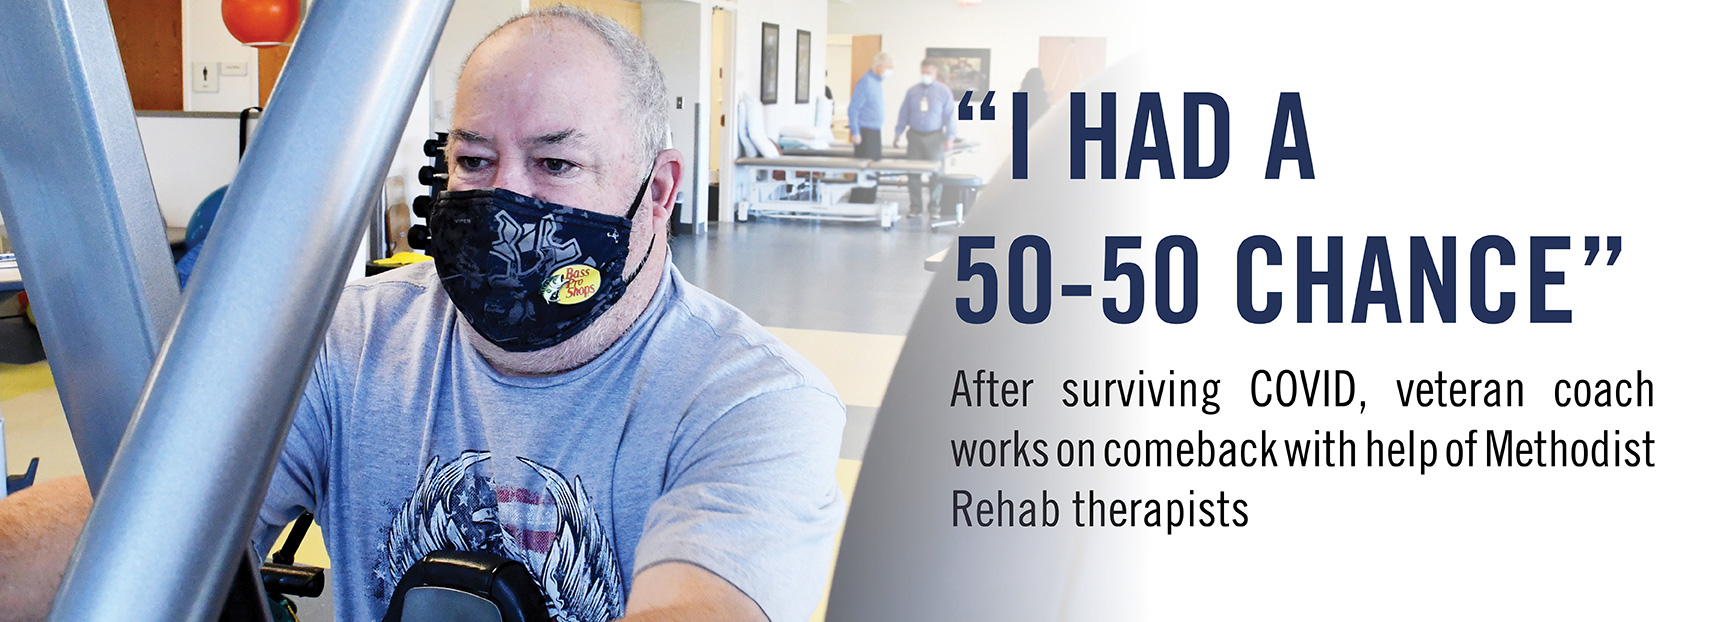 After surviving COVID, veteran coach works on comeback with help of Methodist Rehab therapists